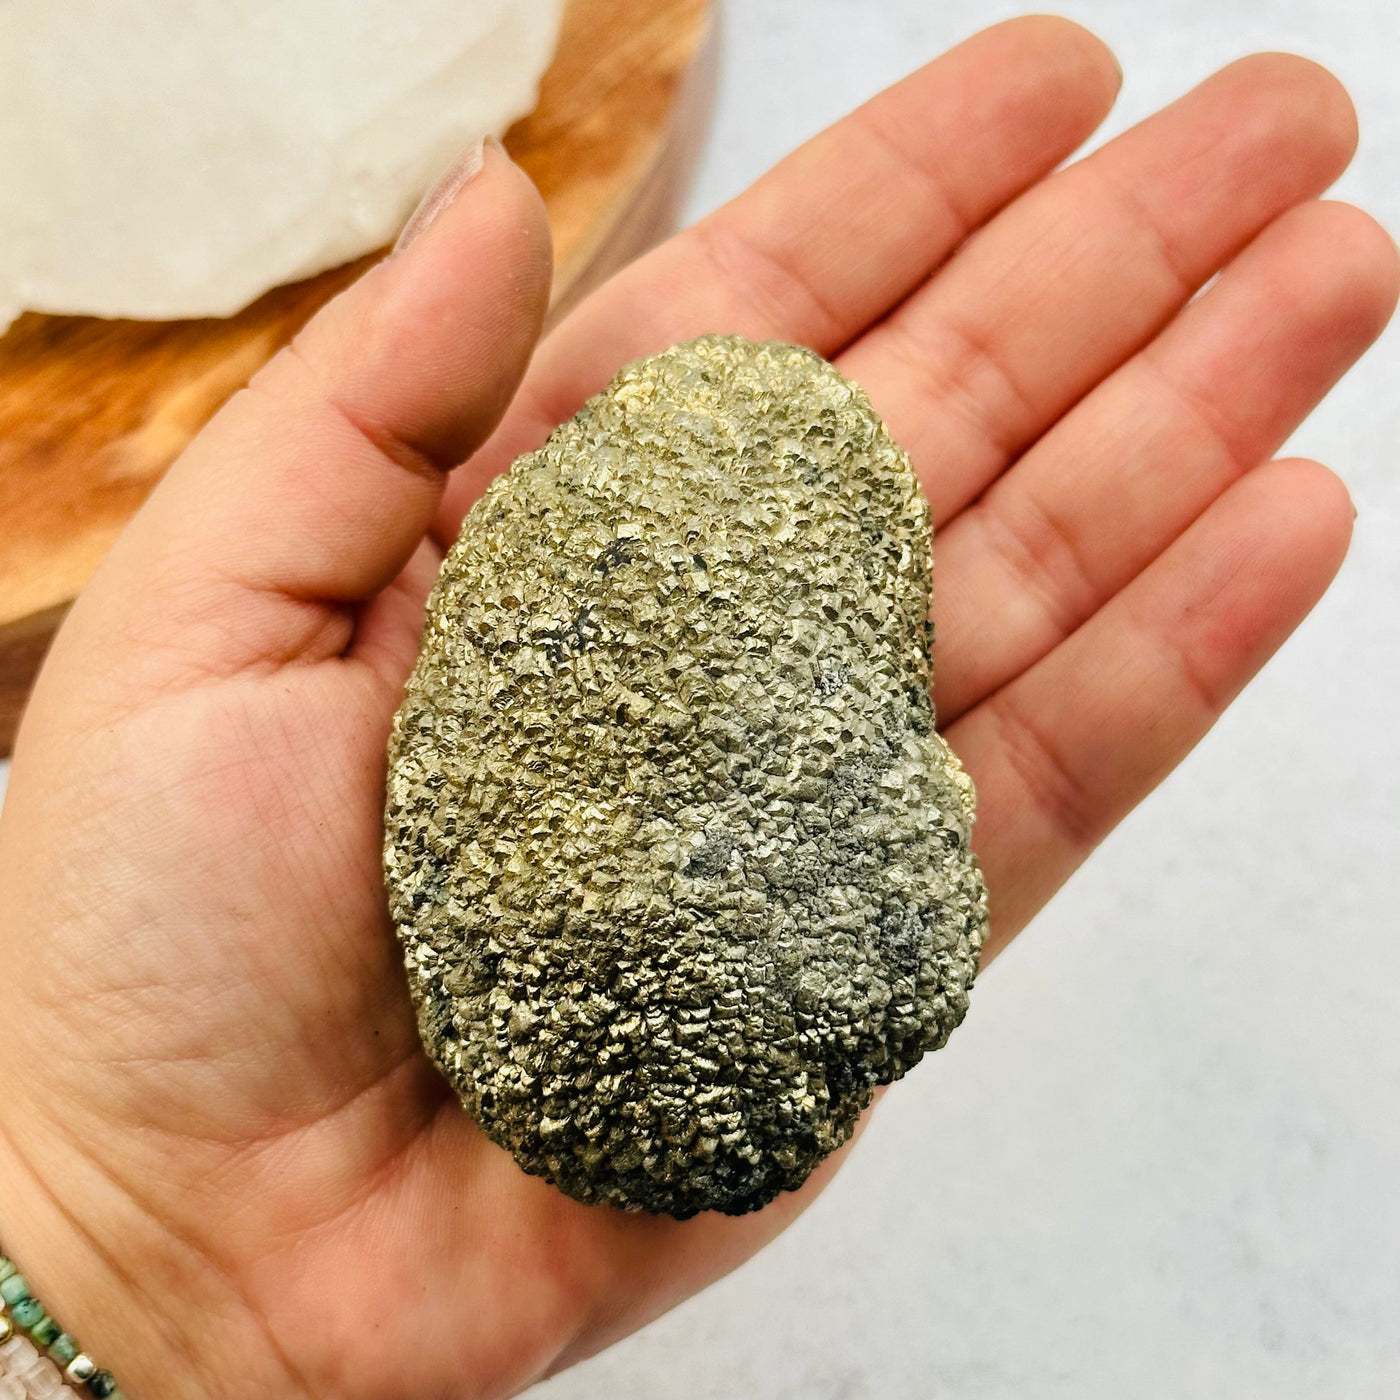 Pyrite Nodule - High Quality in hand for size reference